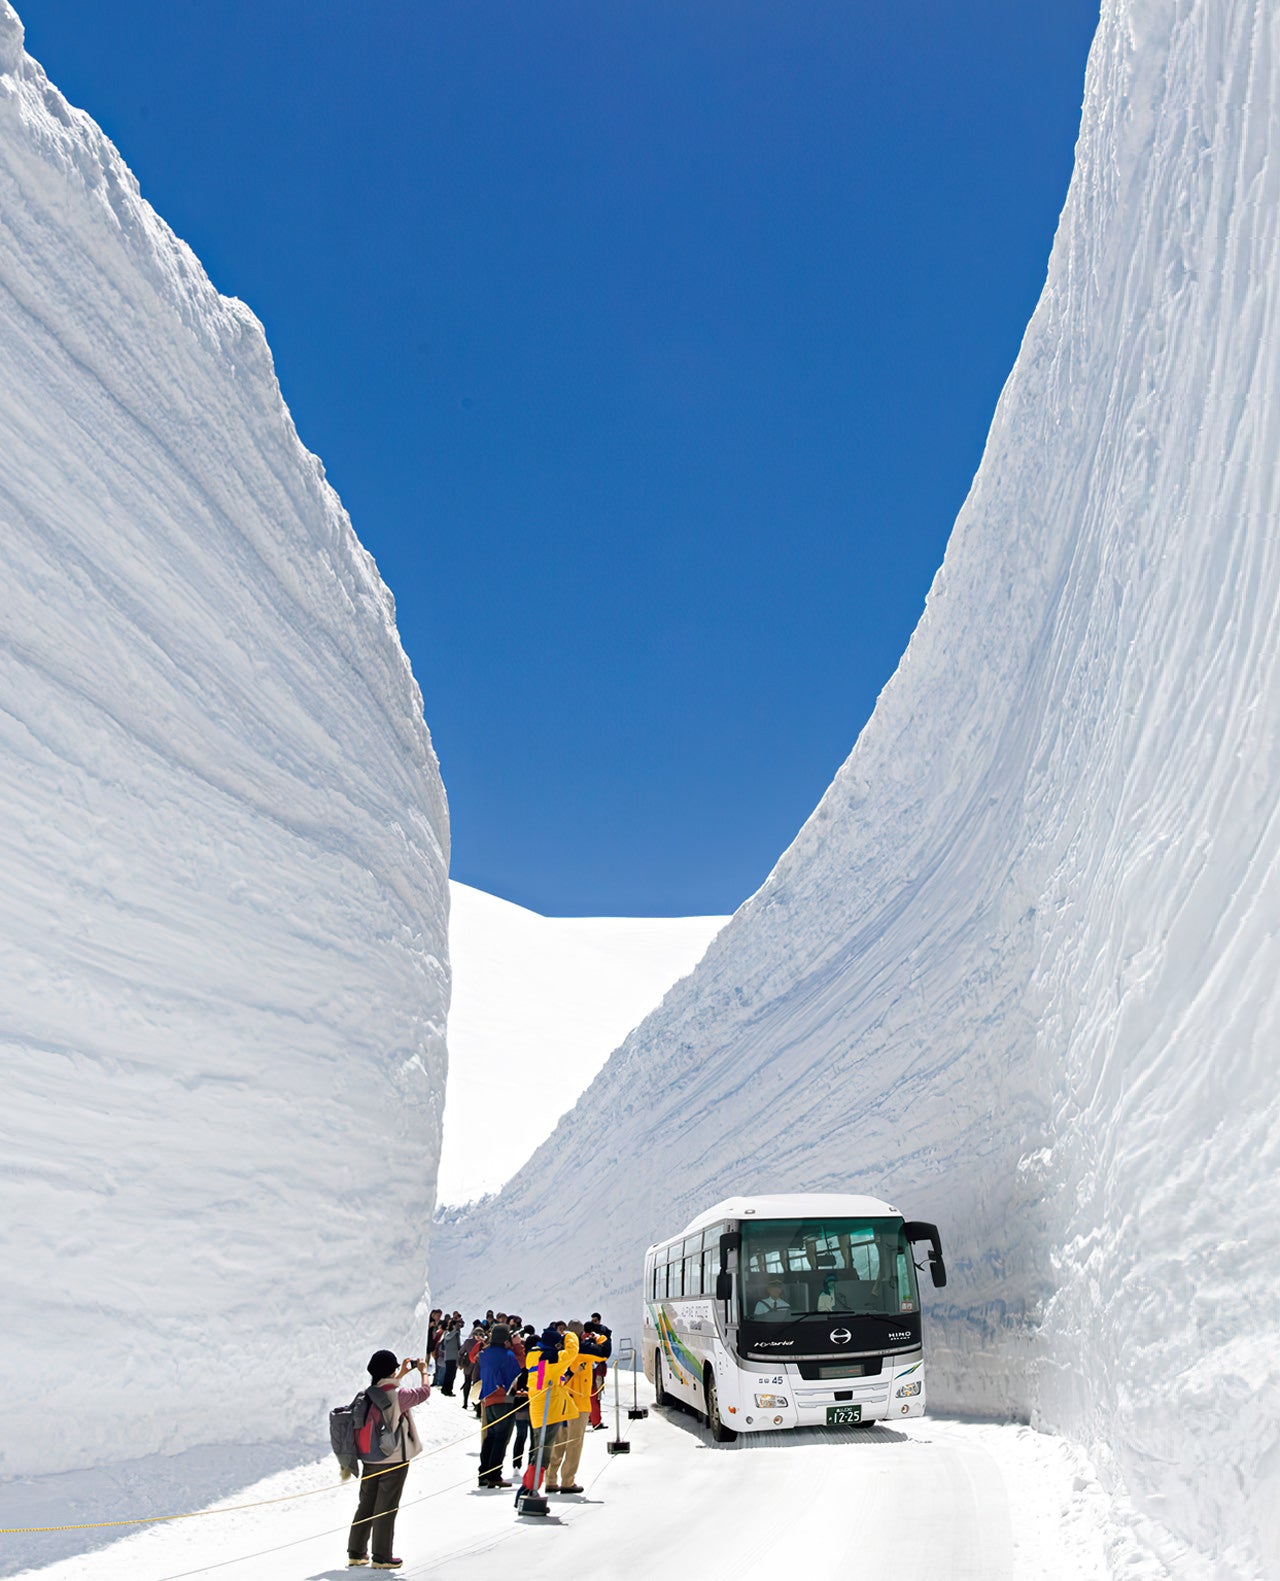 In Toyama Prefecture, there is a wall of snow more than 500 meters long and almost 20 meters high, almost 8 floors, and it is one of the regions that receive the most snow in the world. It is formed when they perform the cleaning of the road for the alpine route.